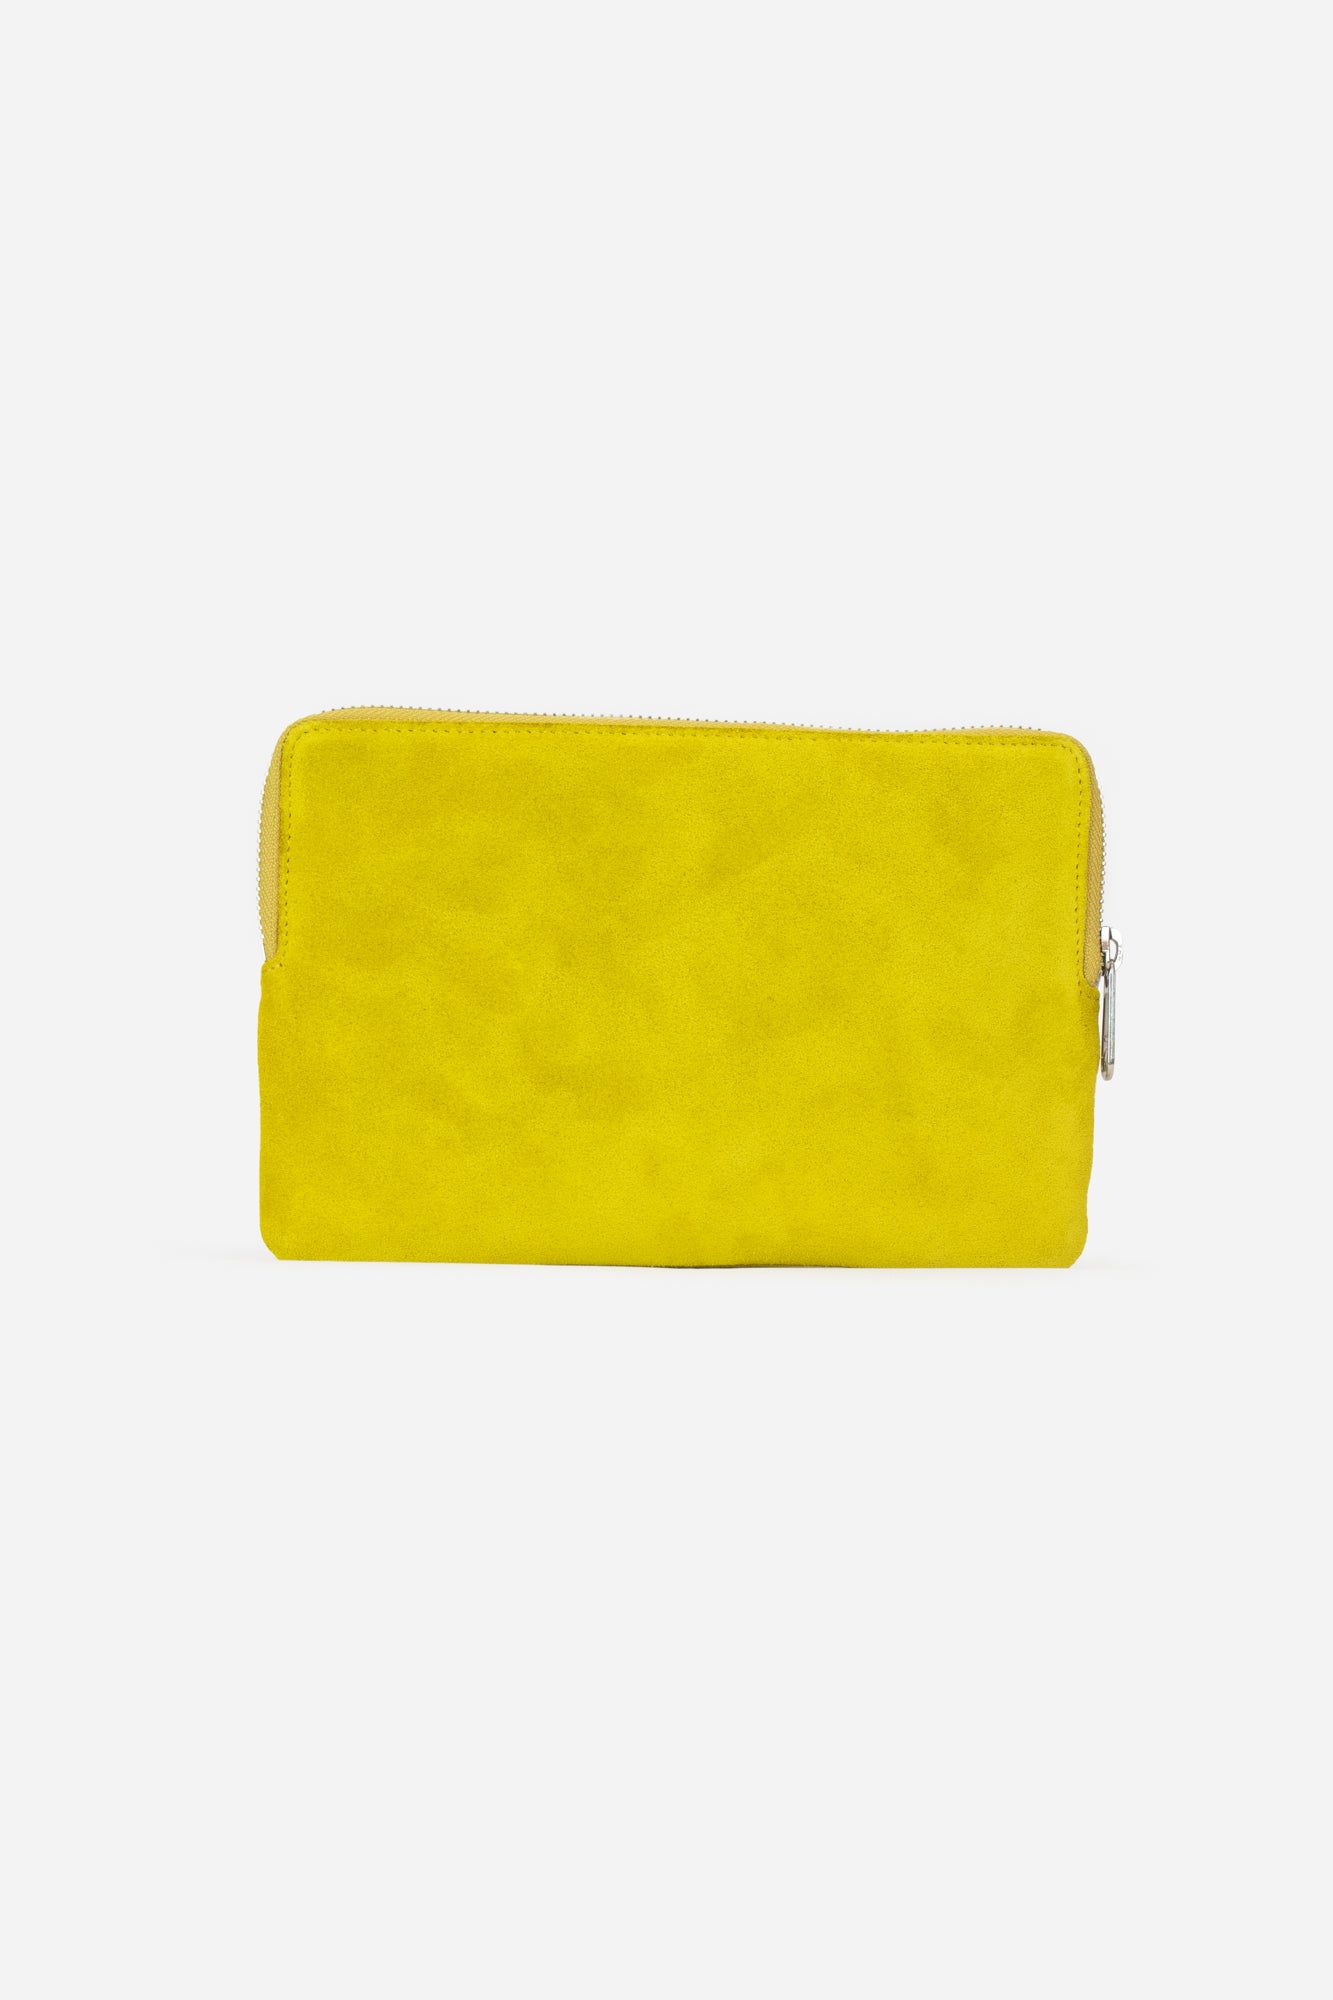 Yellow Suede Wallet Pouch